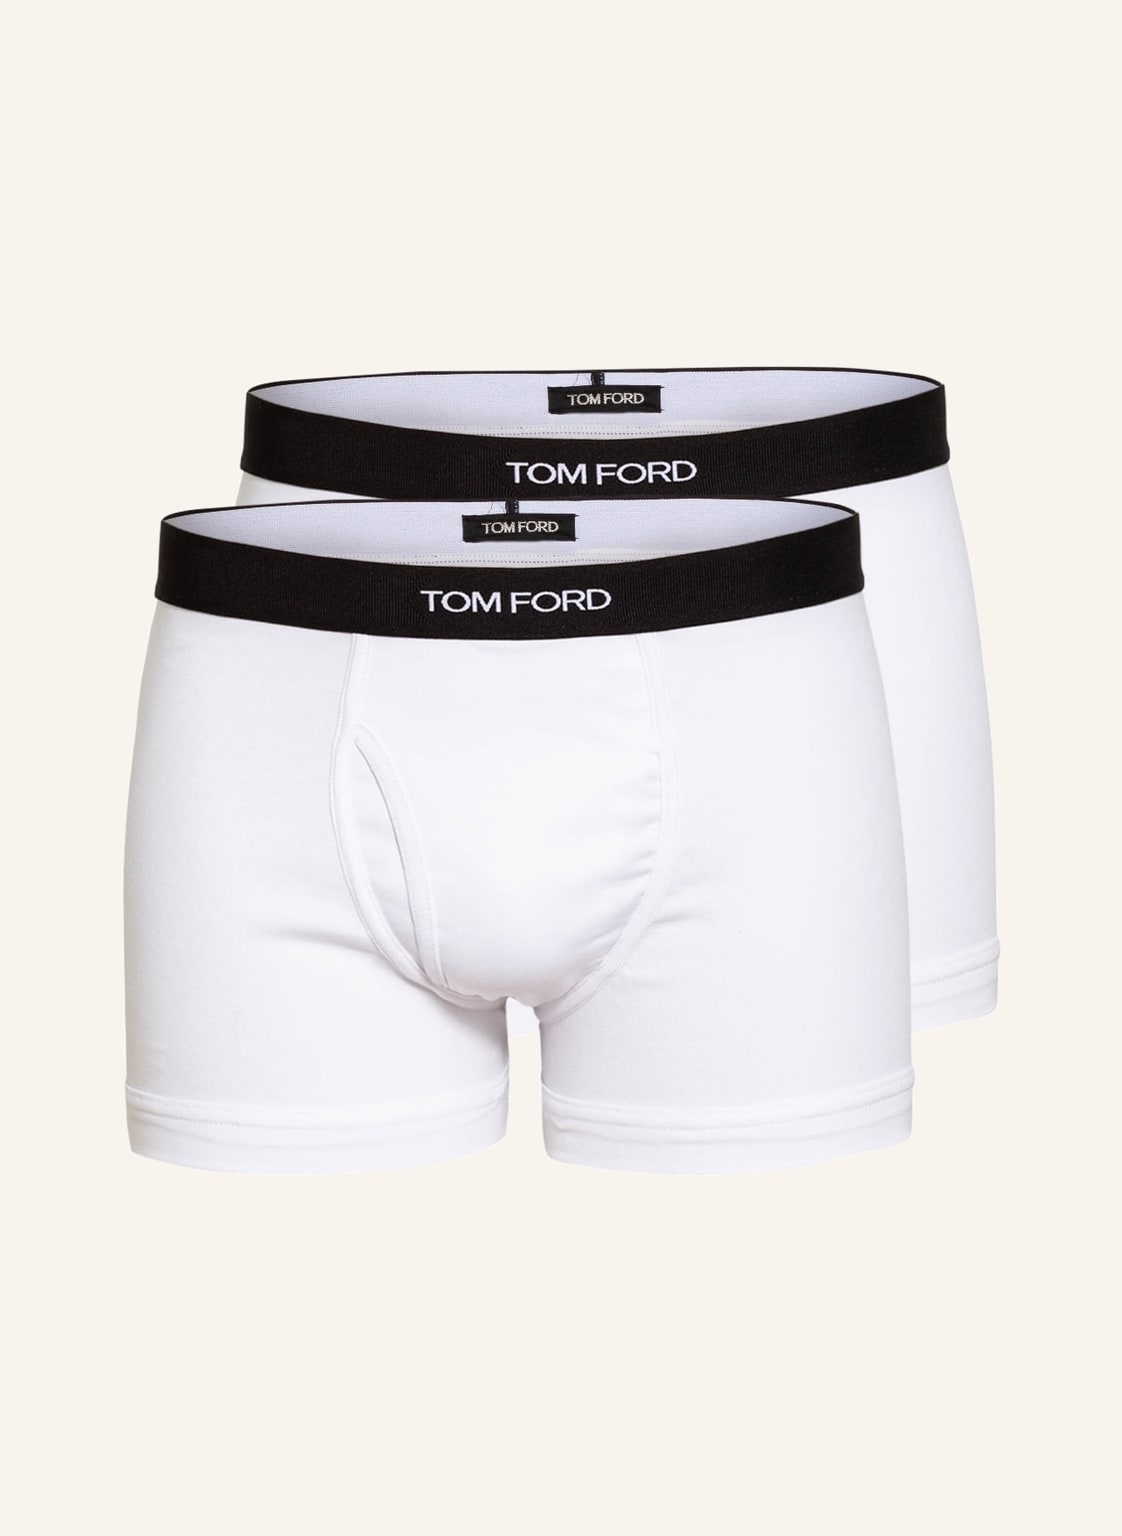 Image of Tom Ford 2er-Pack Boxershorts weiss